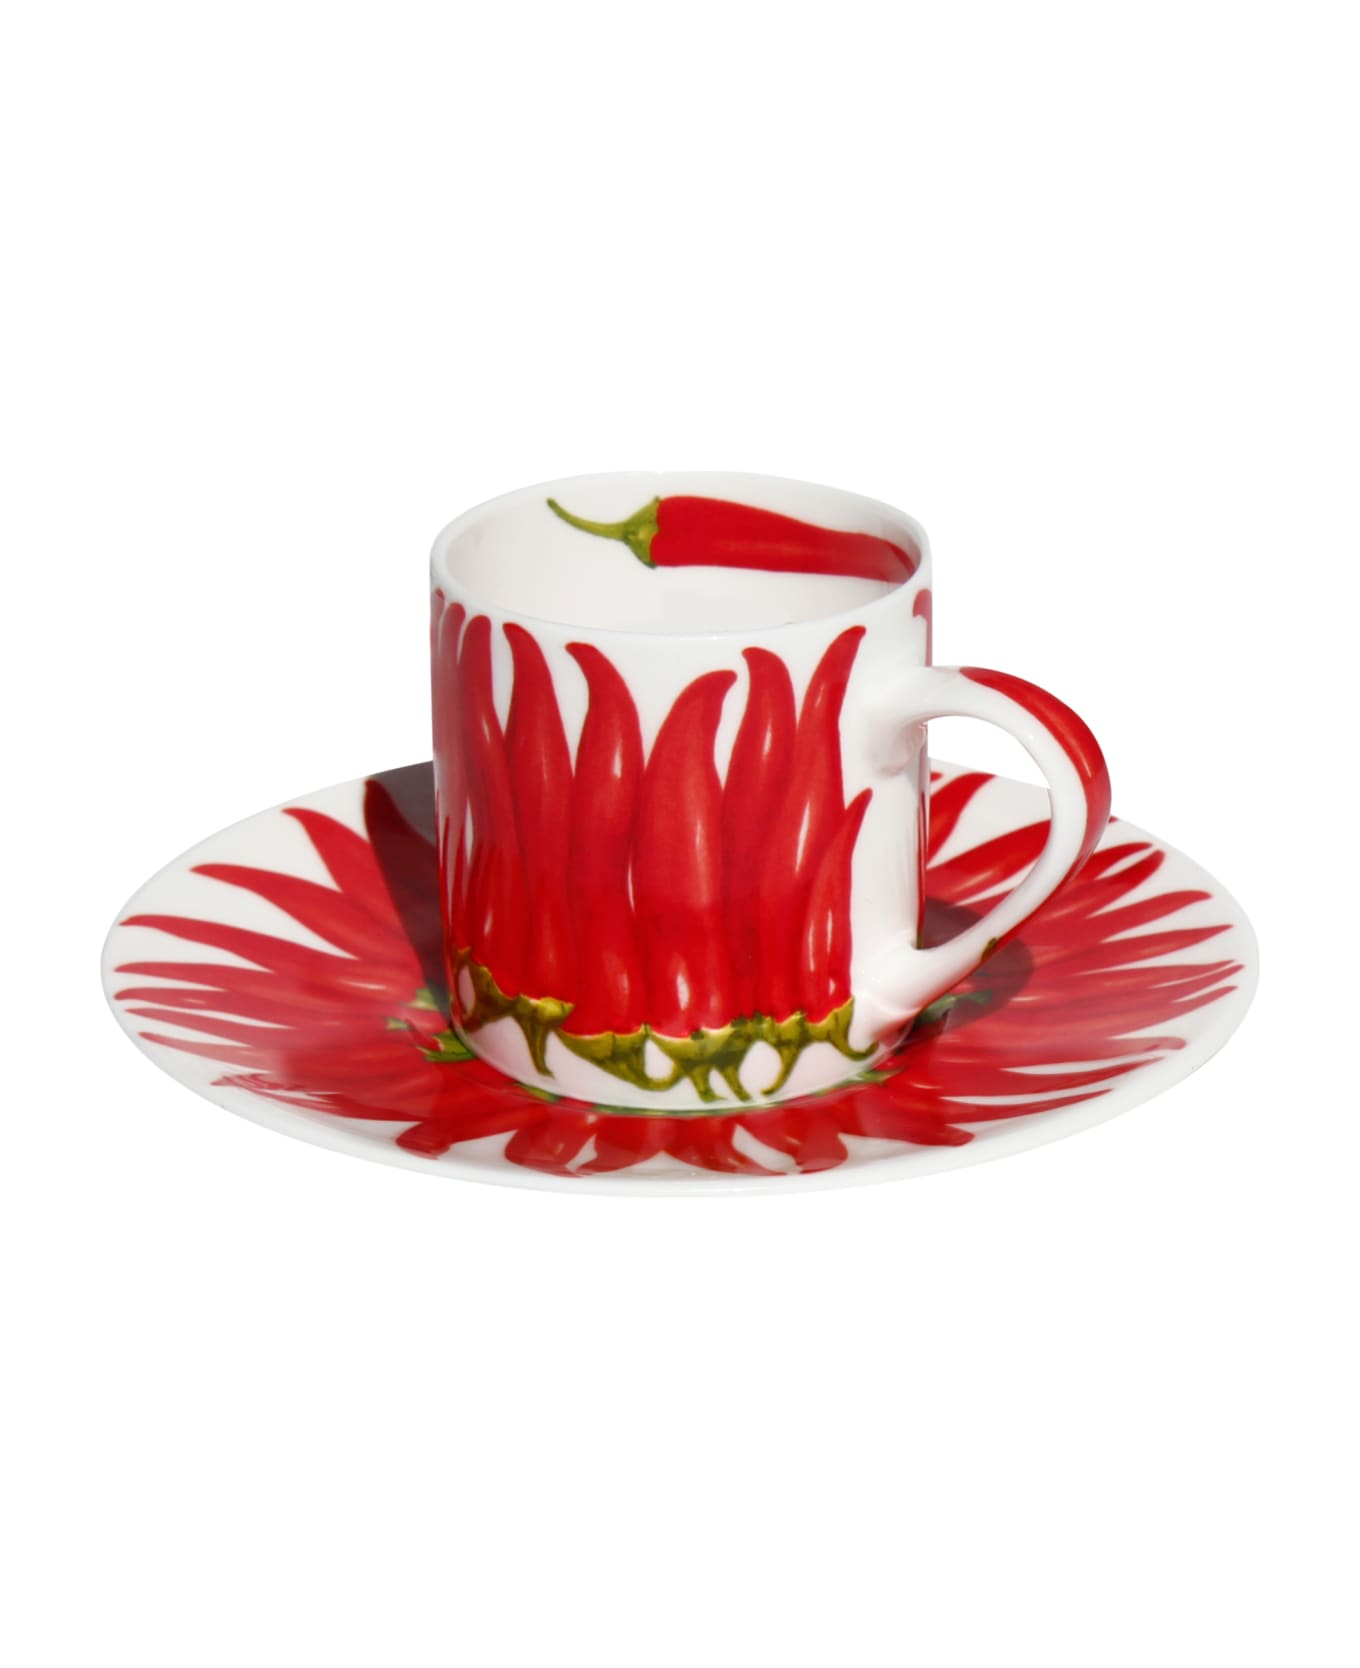 Taitù Set of 2 Espresso Cups & Saucers RED PEPPER - RED Collection - Red お皿＆ボウル